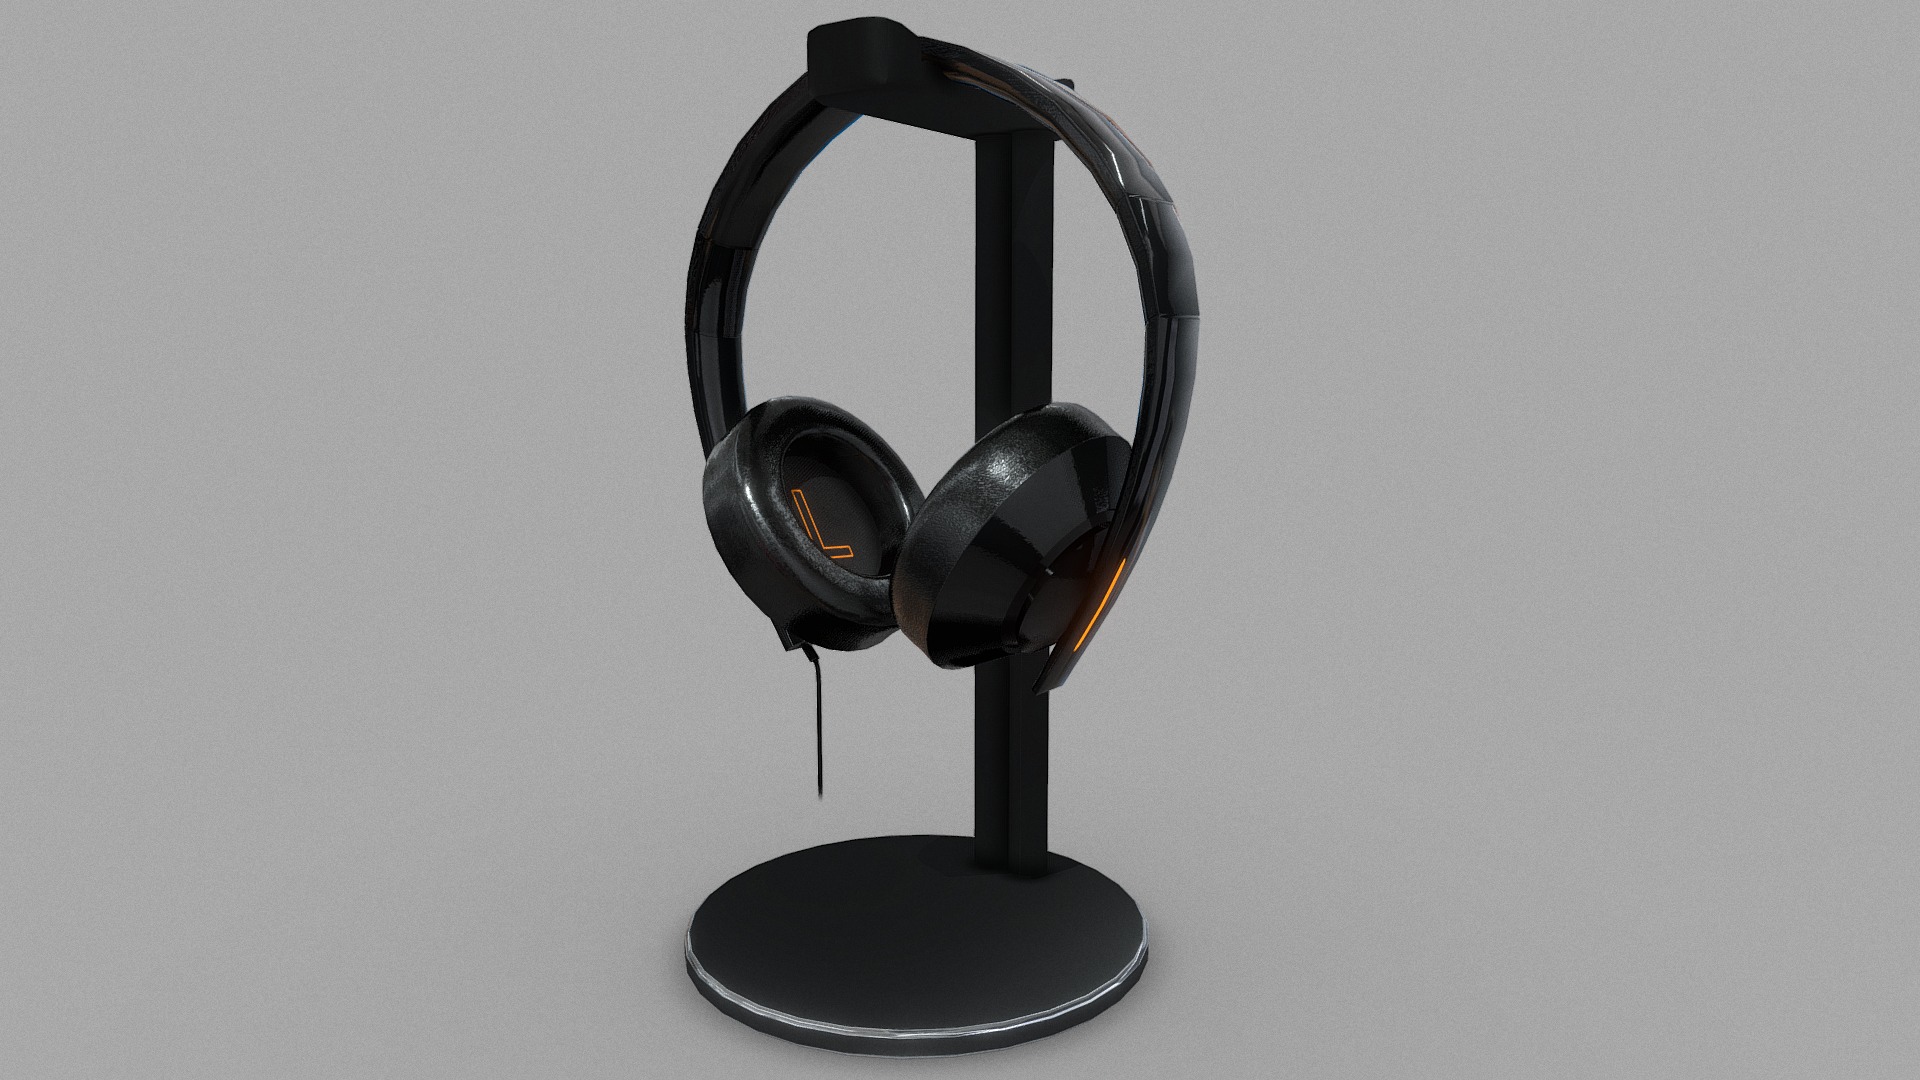 3D model Xiaomi Mi Gaming Headset - This is a 3D model of the Xiaomi Mi Gaming Headset. The 3D model is about a black and silver headphone.